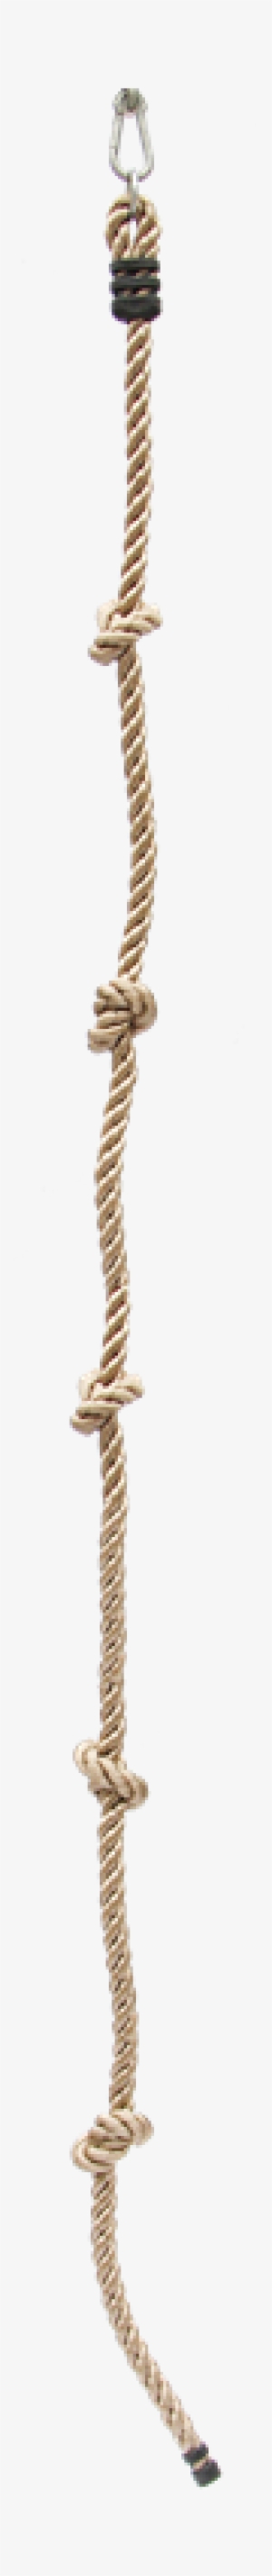 Rope Ladder Png - Chain